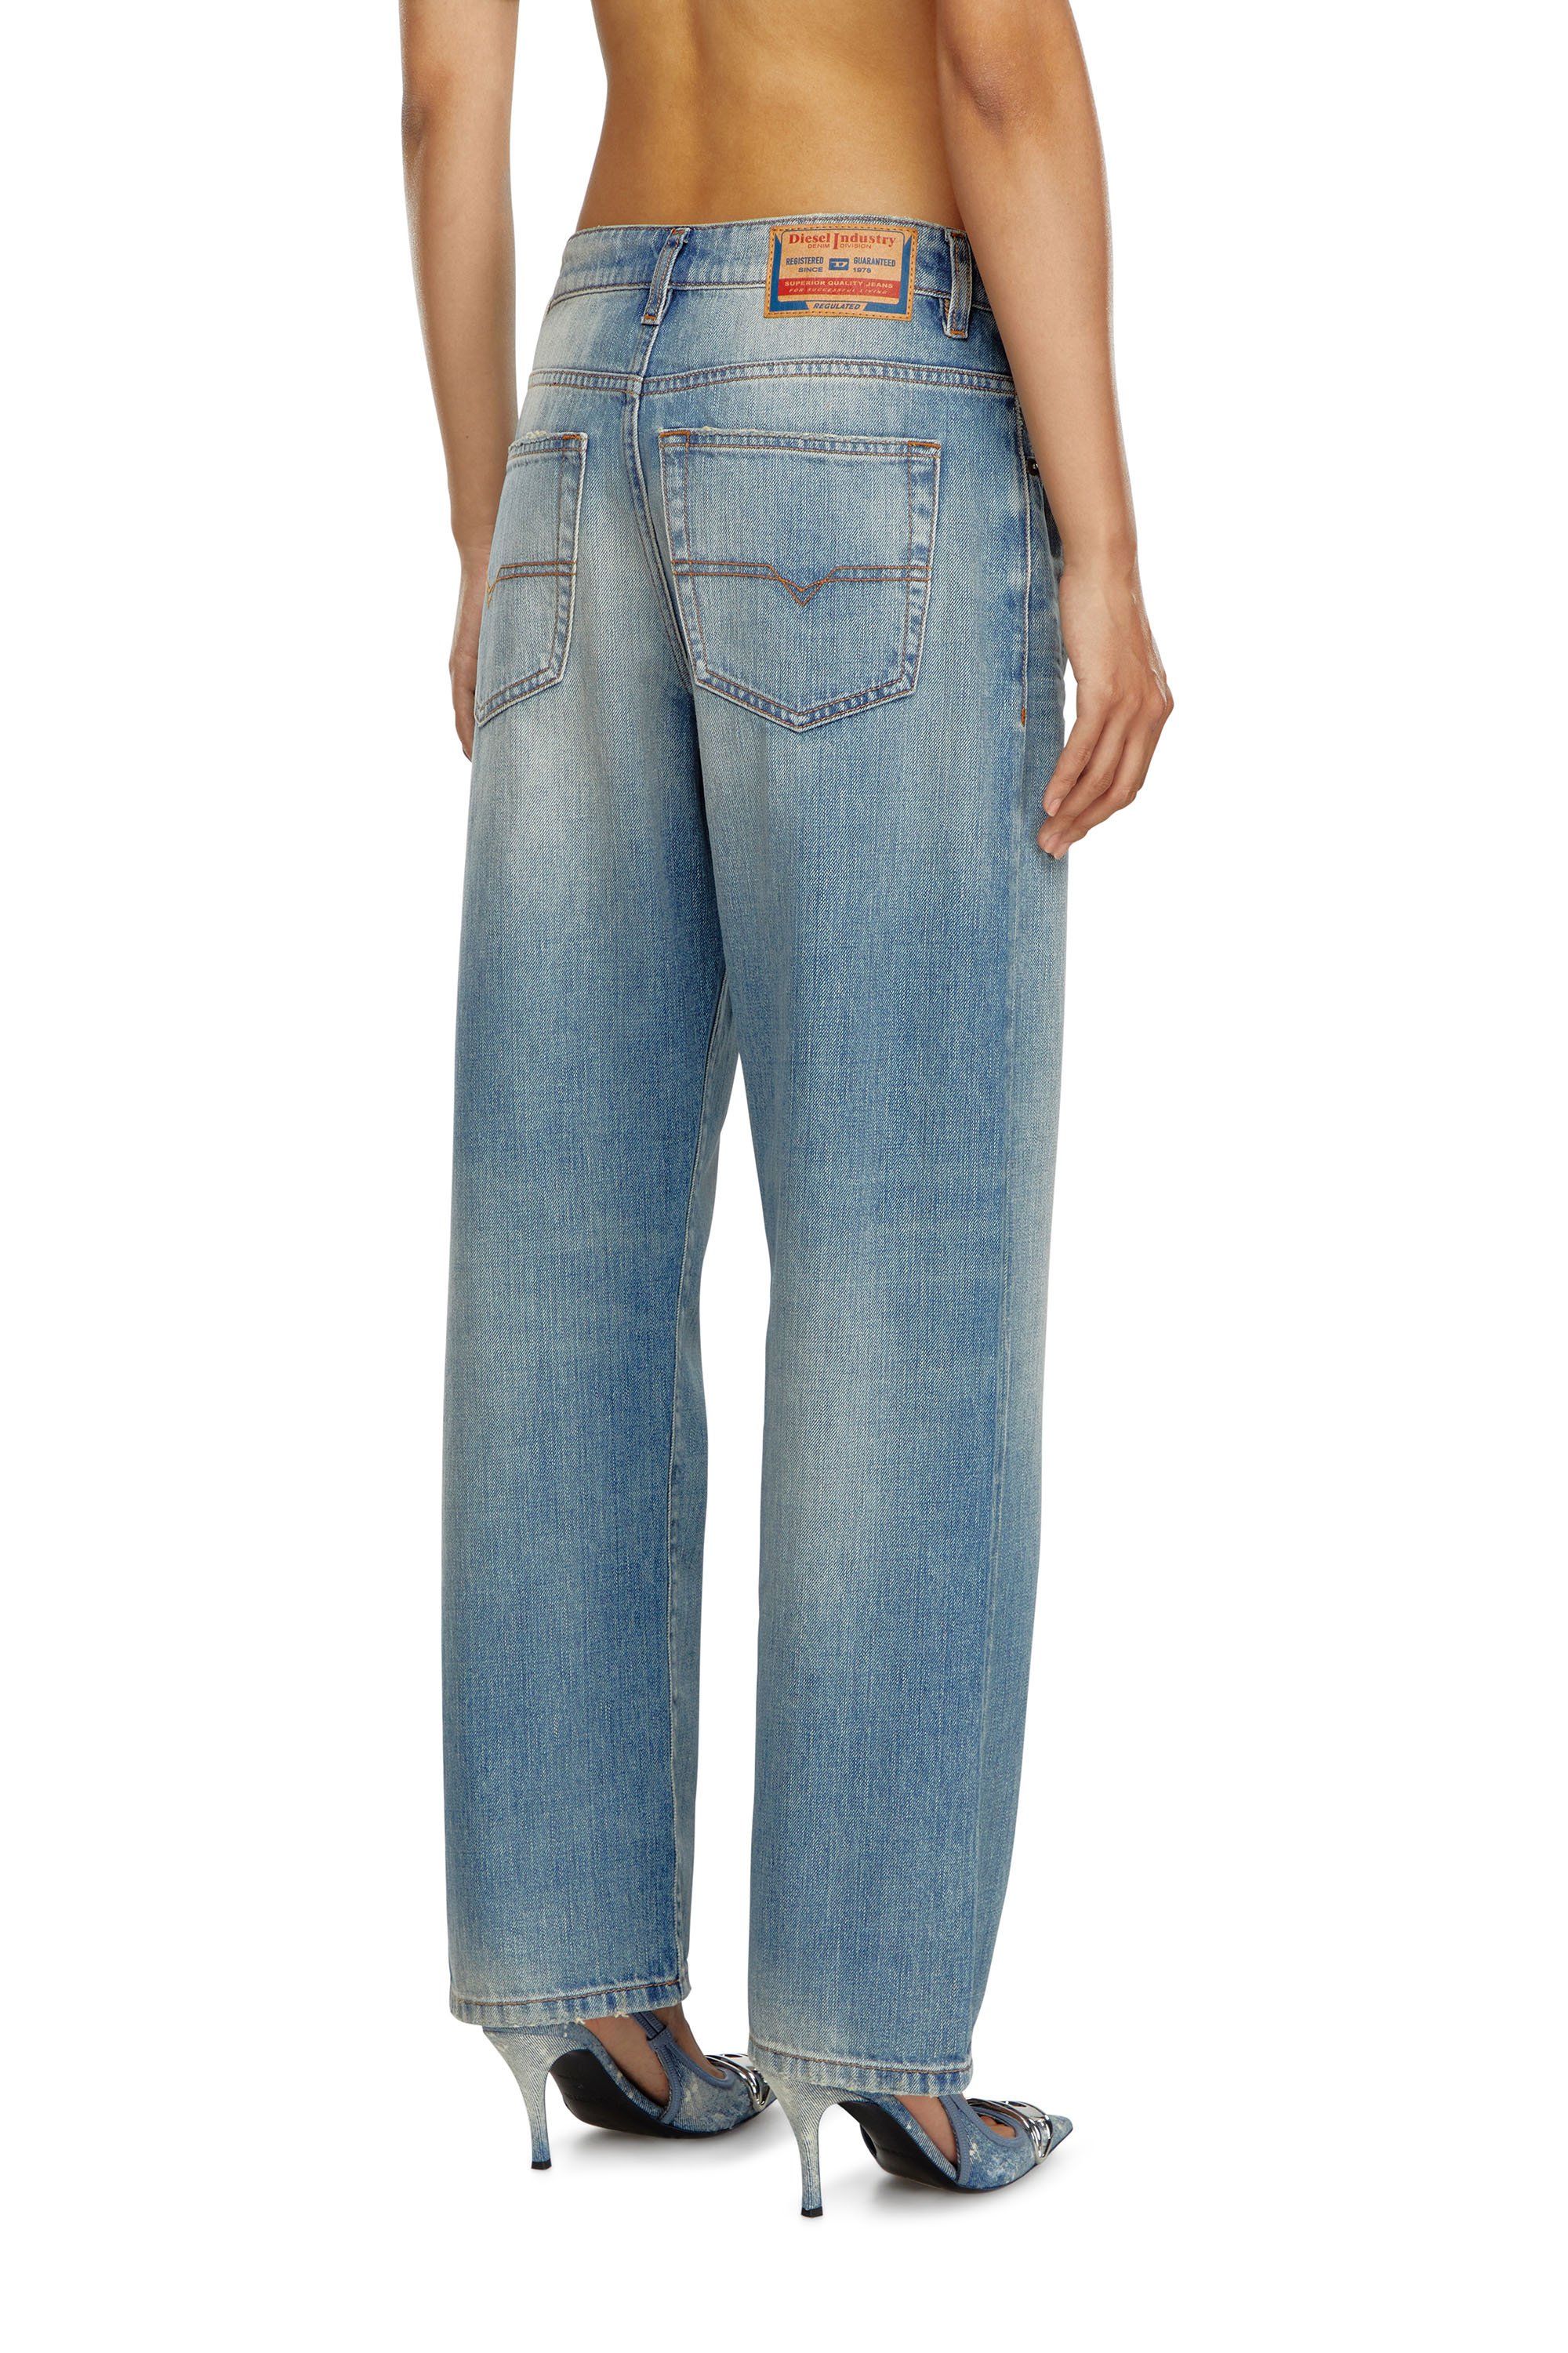 Diesel - Straight Jeans 1999 D-Reggy 0GRDN, Mujer Straight Jeans - 1999 D-Reggy in Azul marino - Image 4